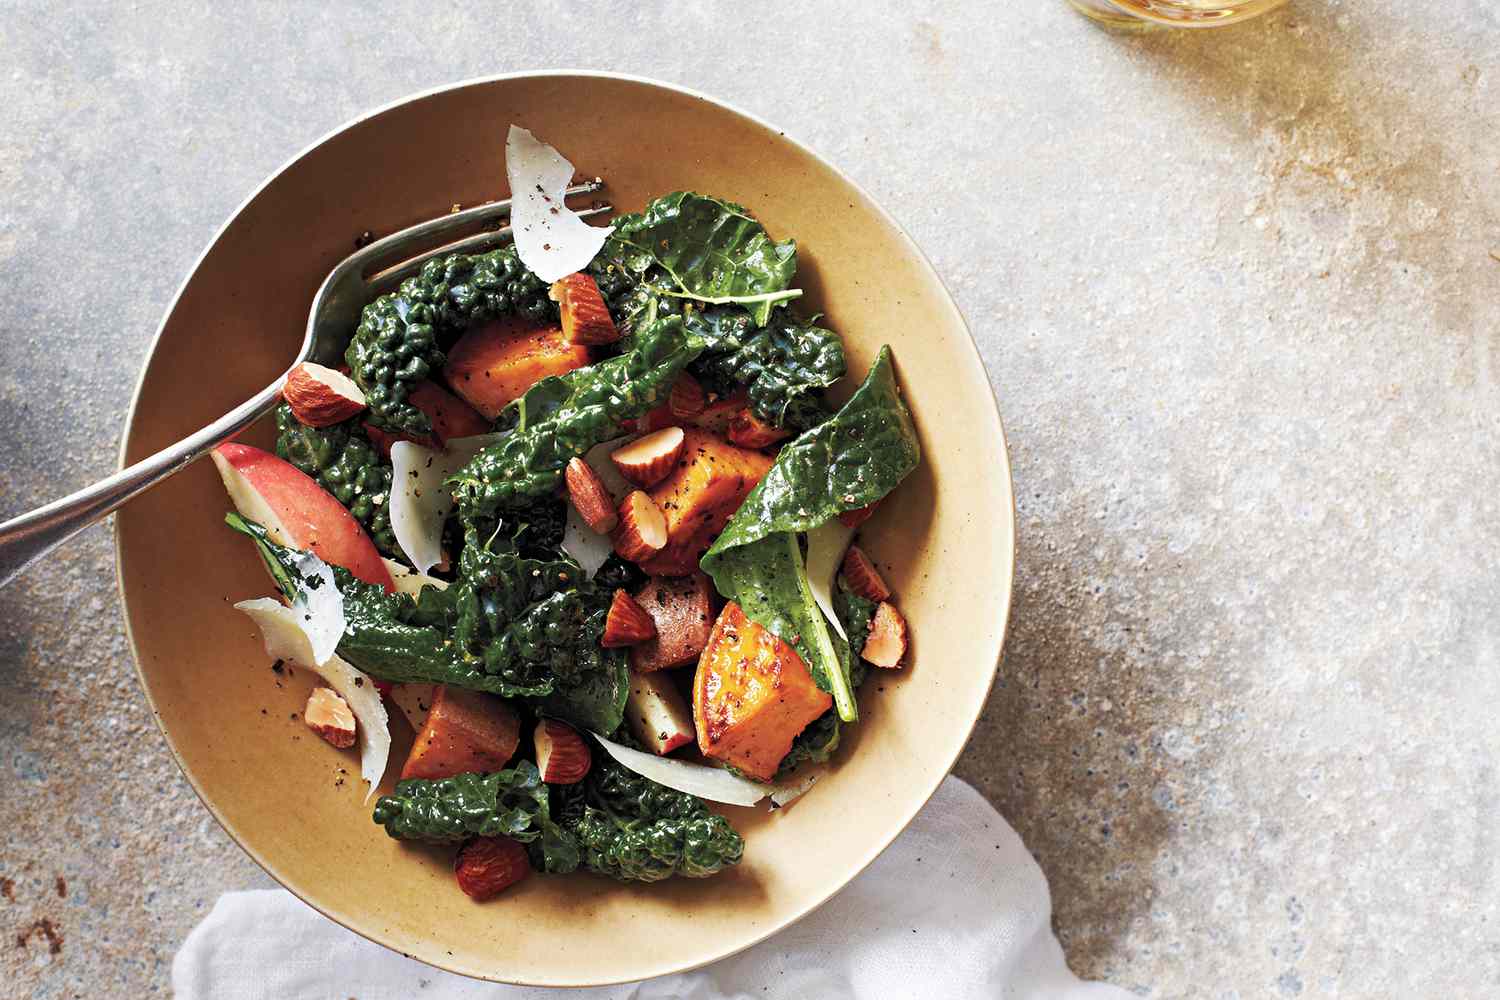 Mustardy Kale Salad With Roasted Sweet Potato and Apple